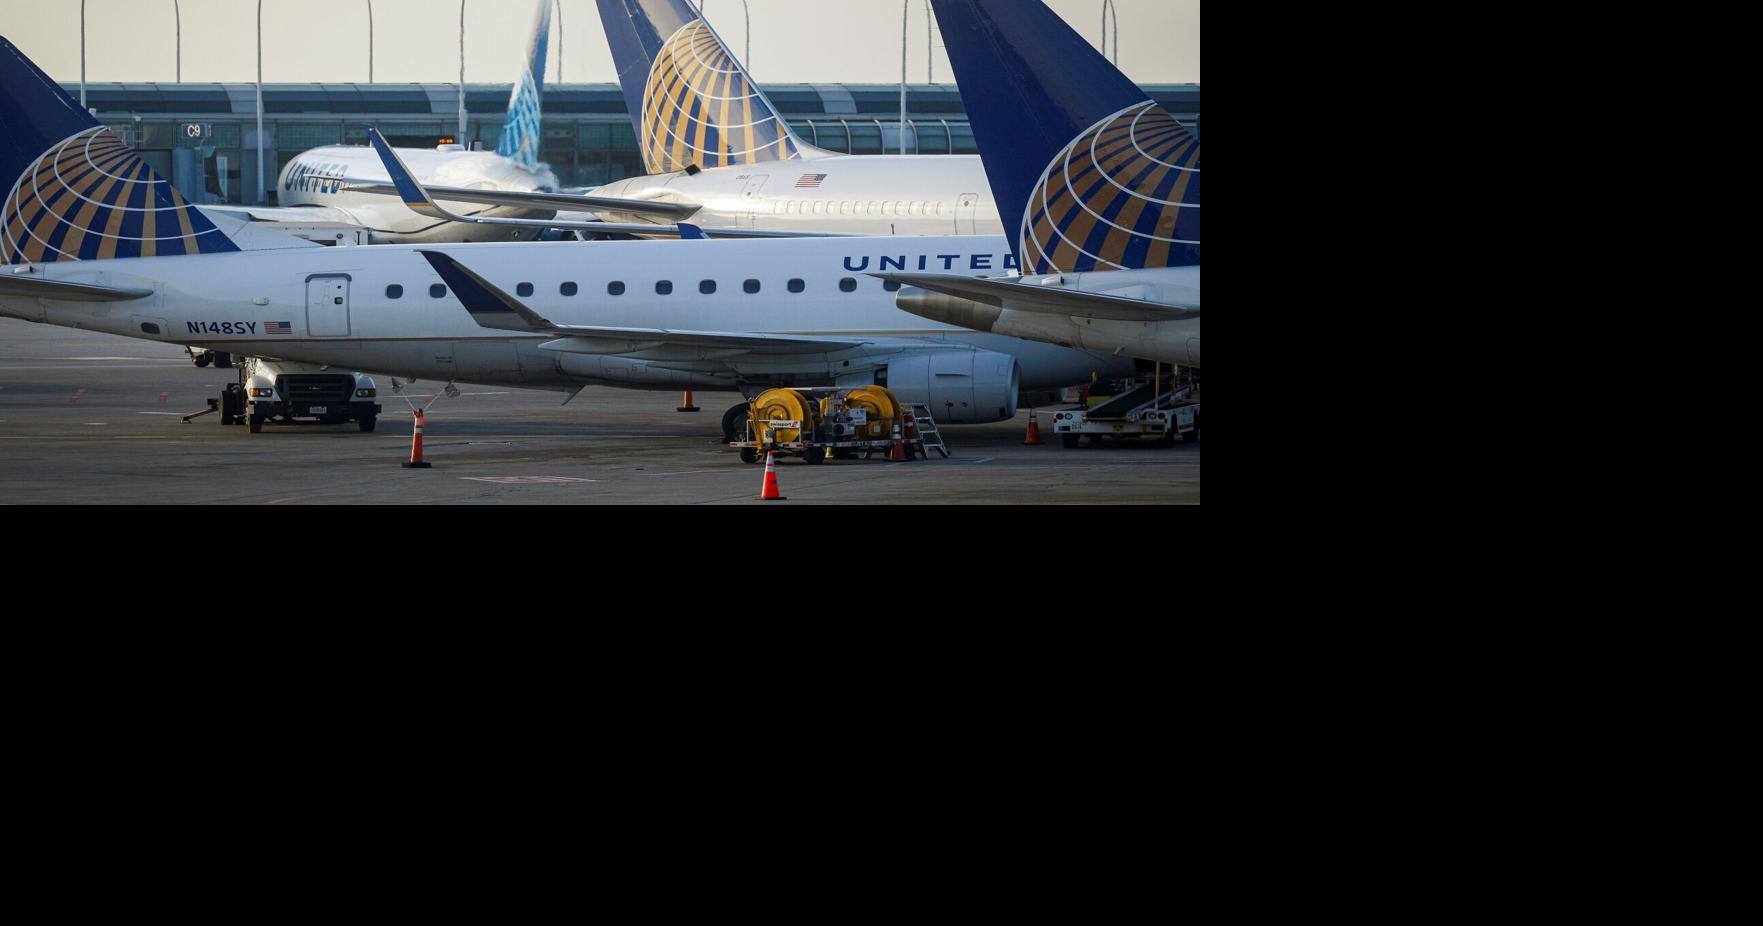 United Airlines to let unvaccinated employees return to jobs March 28 |  News | Marianas Variety News & Views